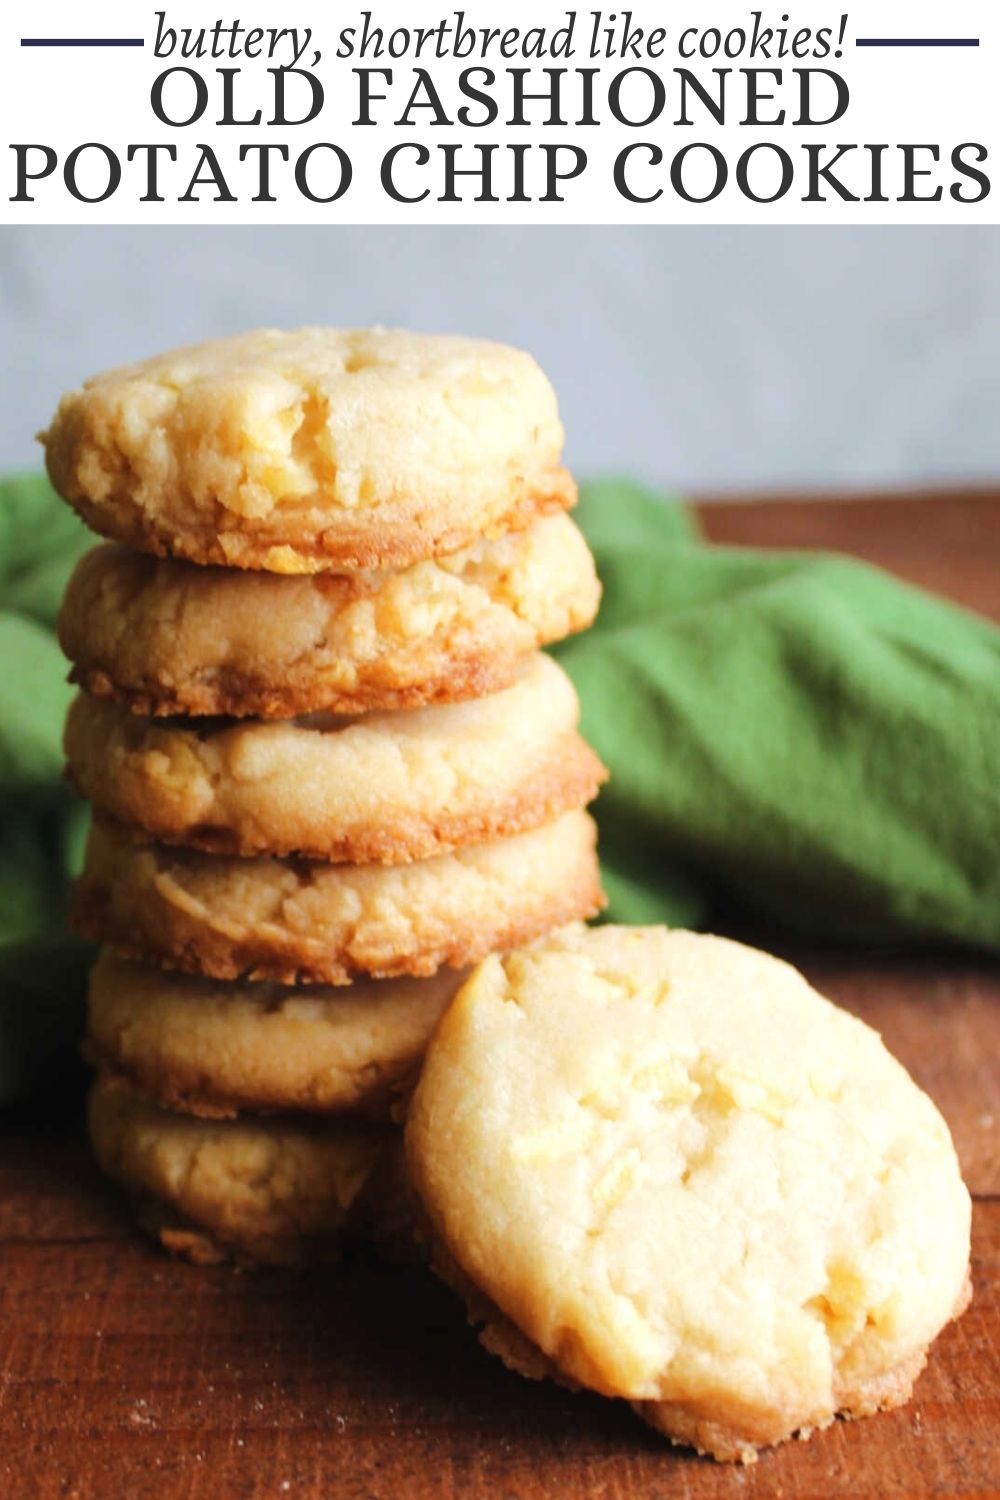 Grandma's potato chip cookies only take 5 simple ingredients to make. The buttery shortbread cookies have an extra bit of salt and crunch from the potato chips. They are fabulous on their own or dipped in chocolate and sprinkled with some extra bits of potato chip.